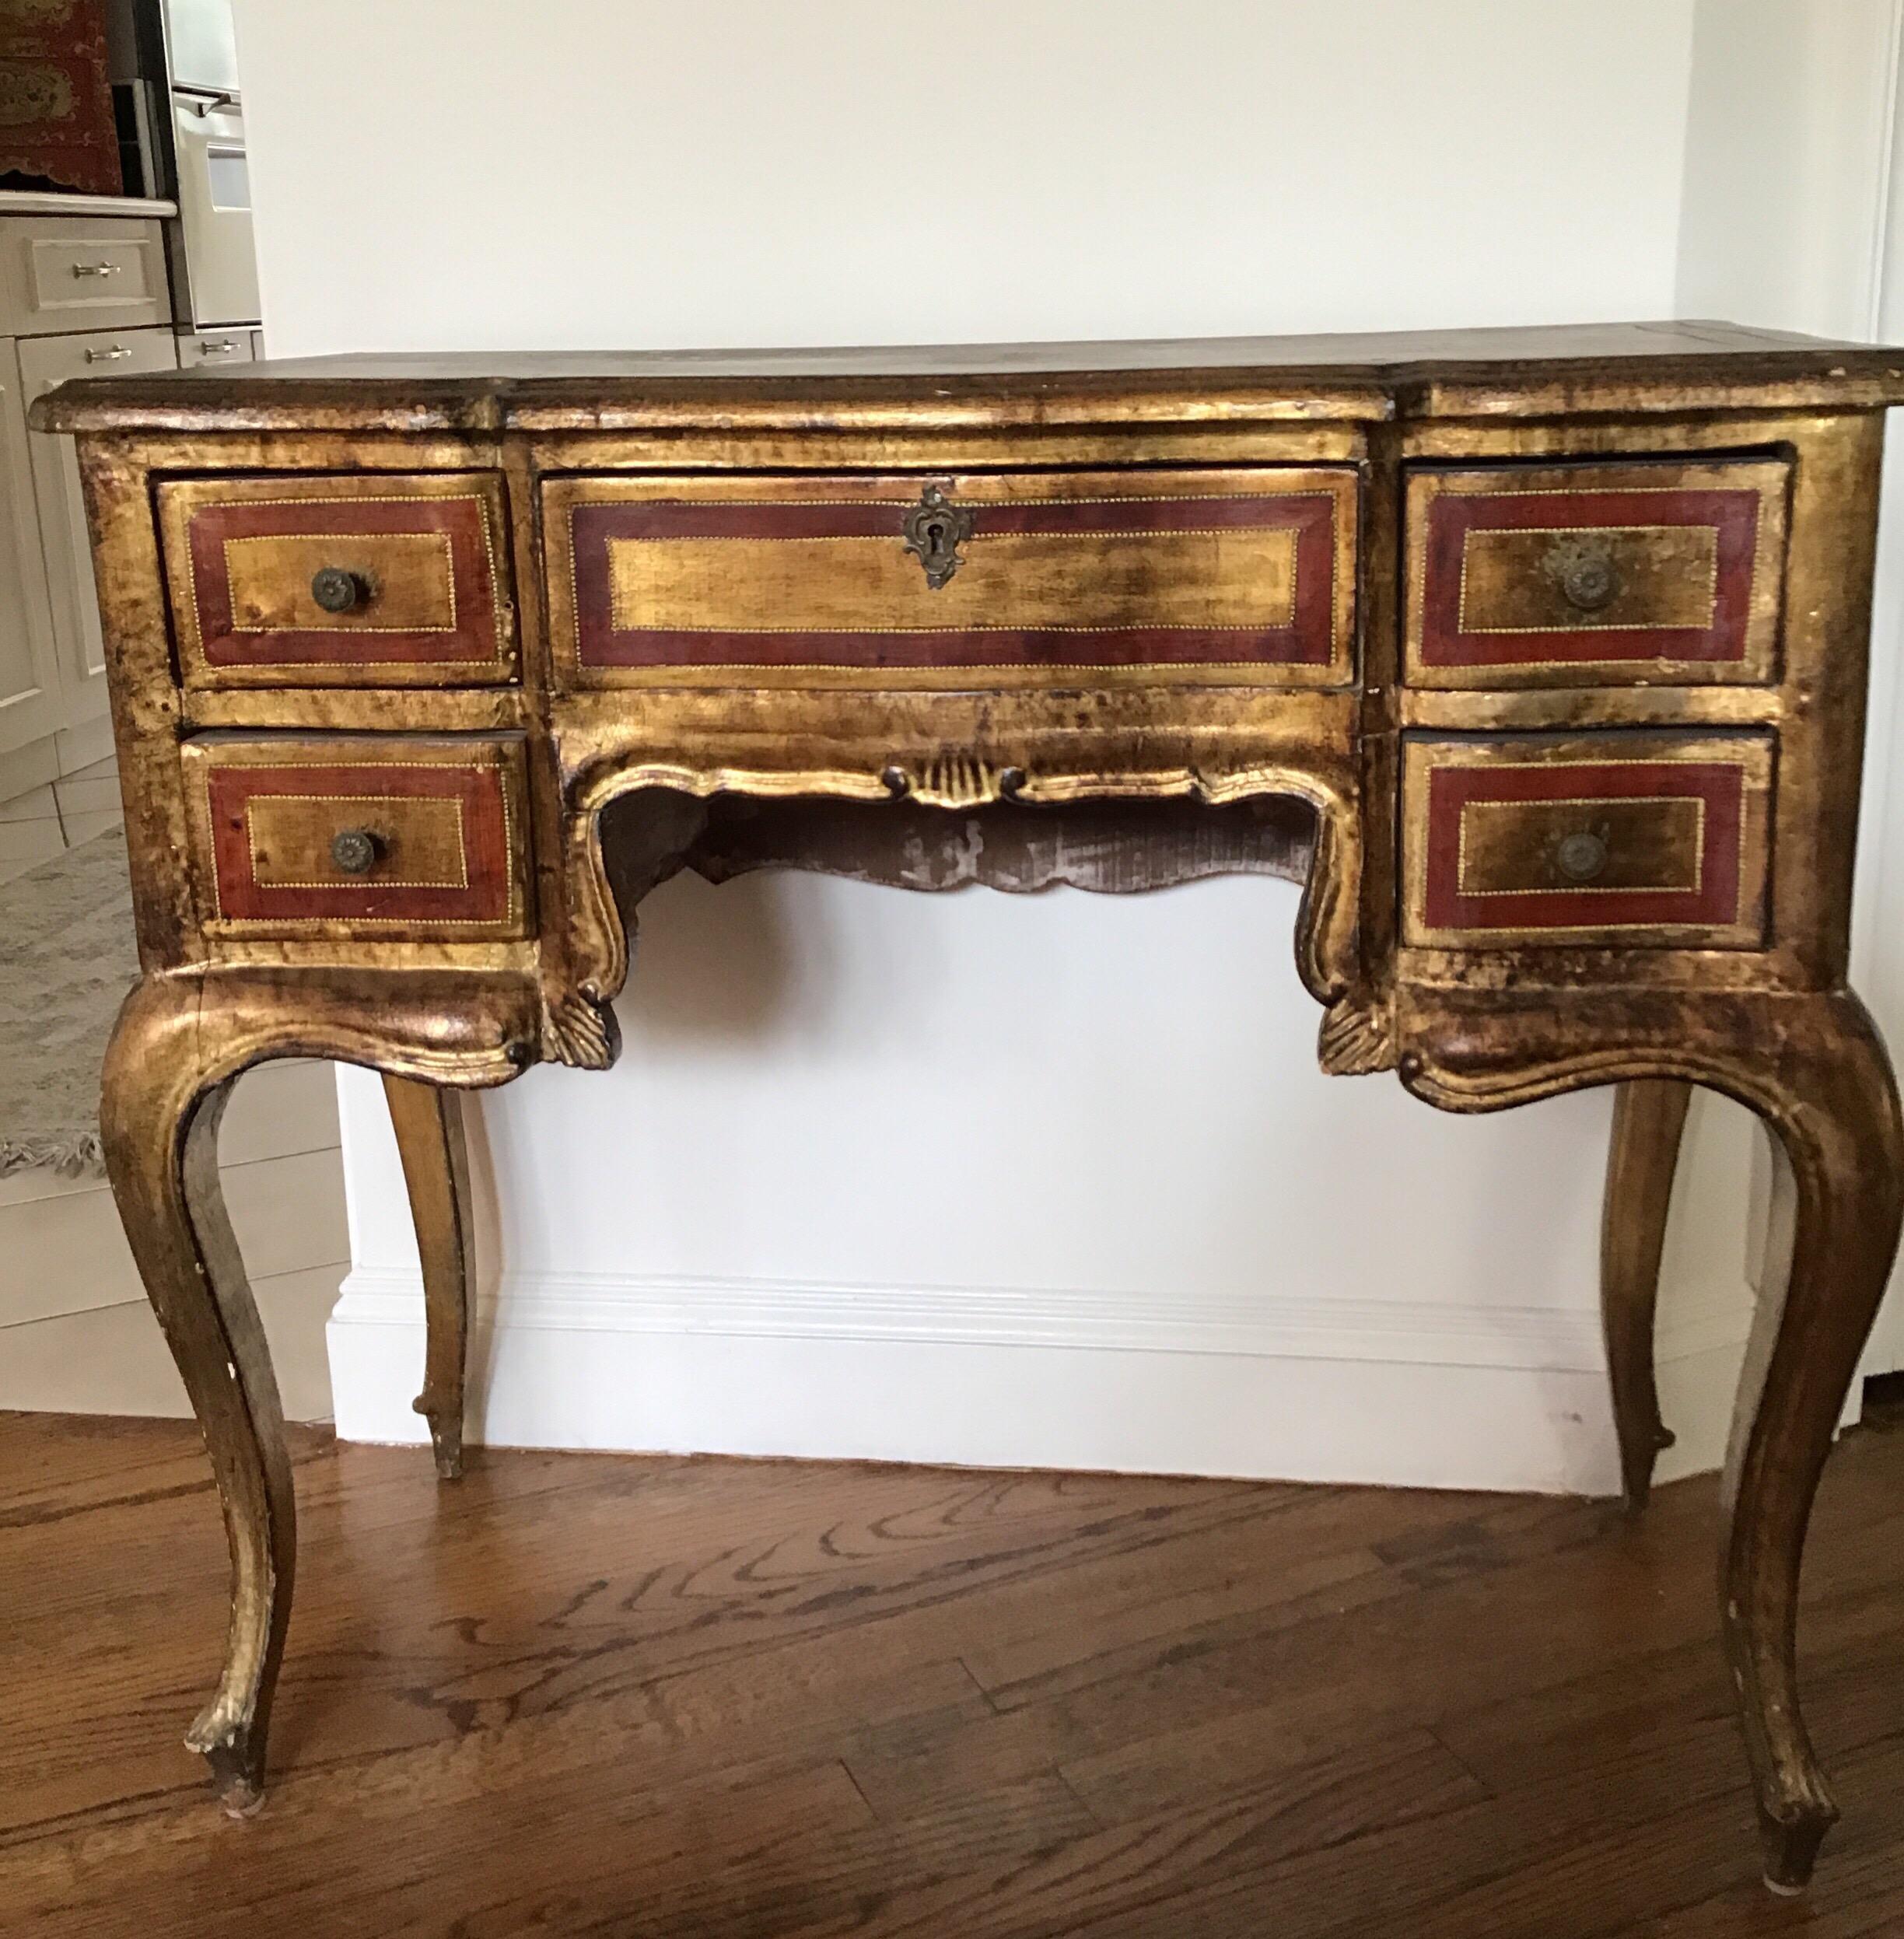 Hand painted Venetian style desk.
Some ware on surface.